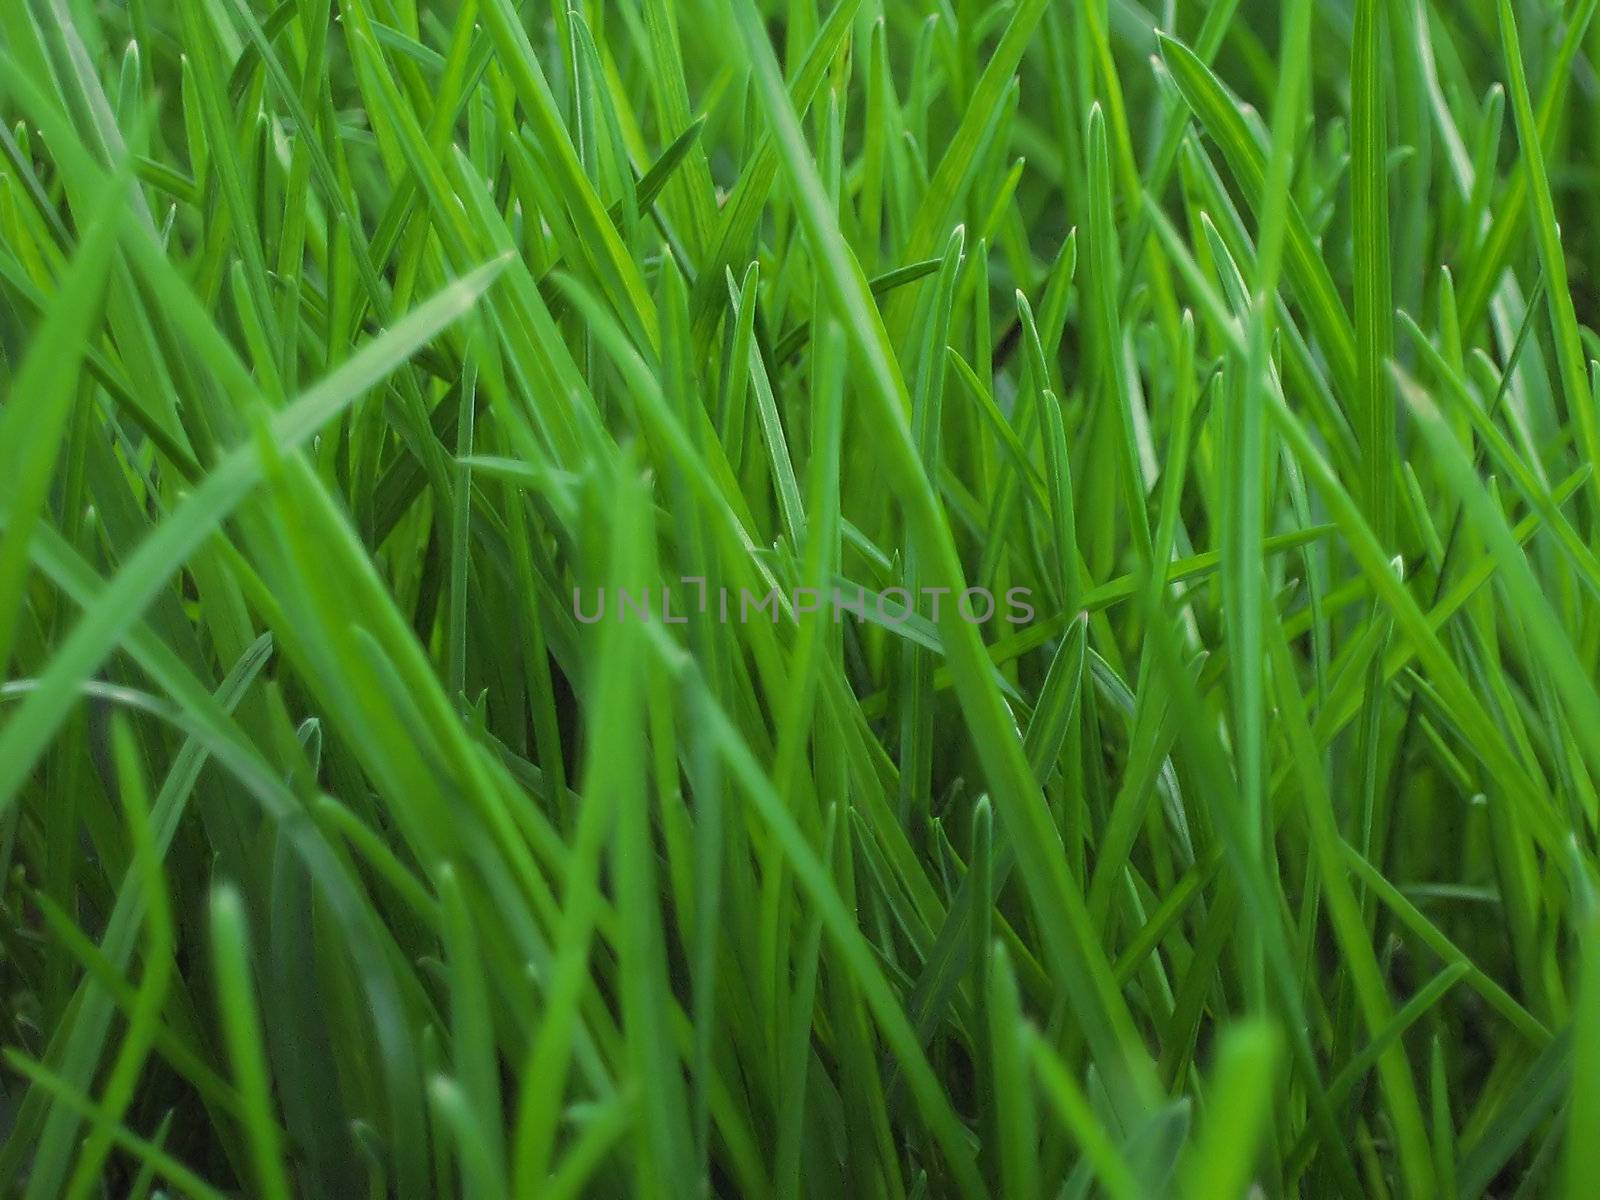 A photograph of grass detailing its structure.